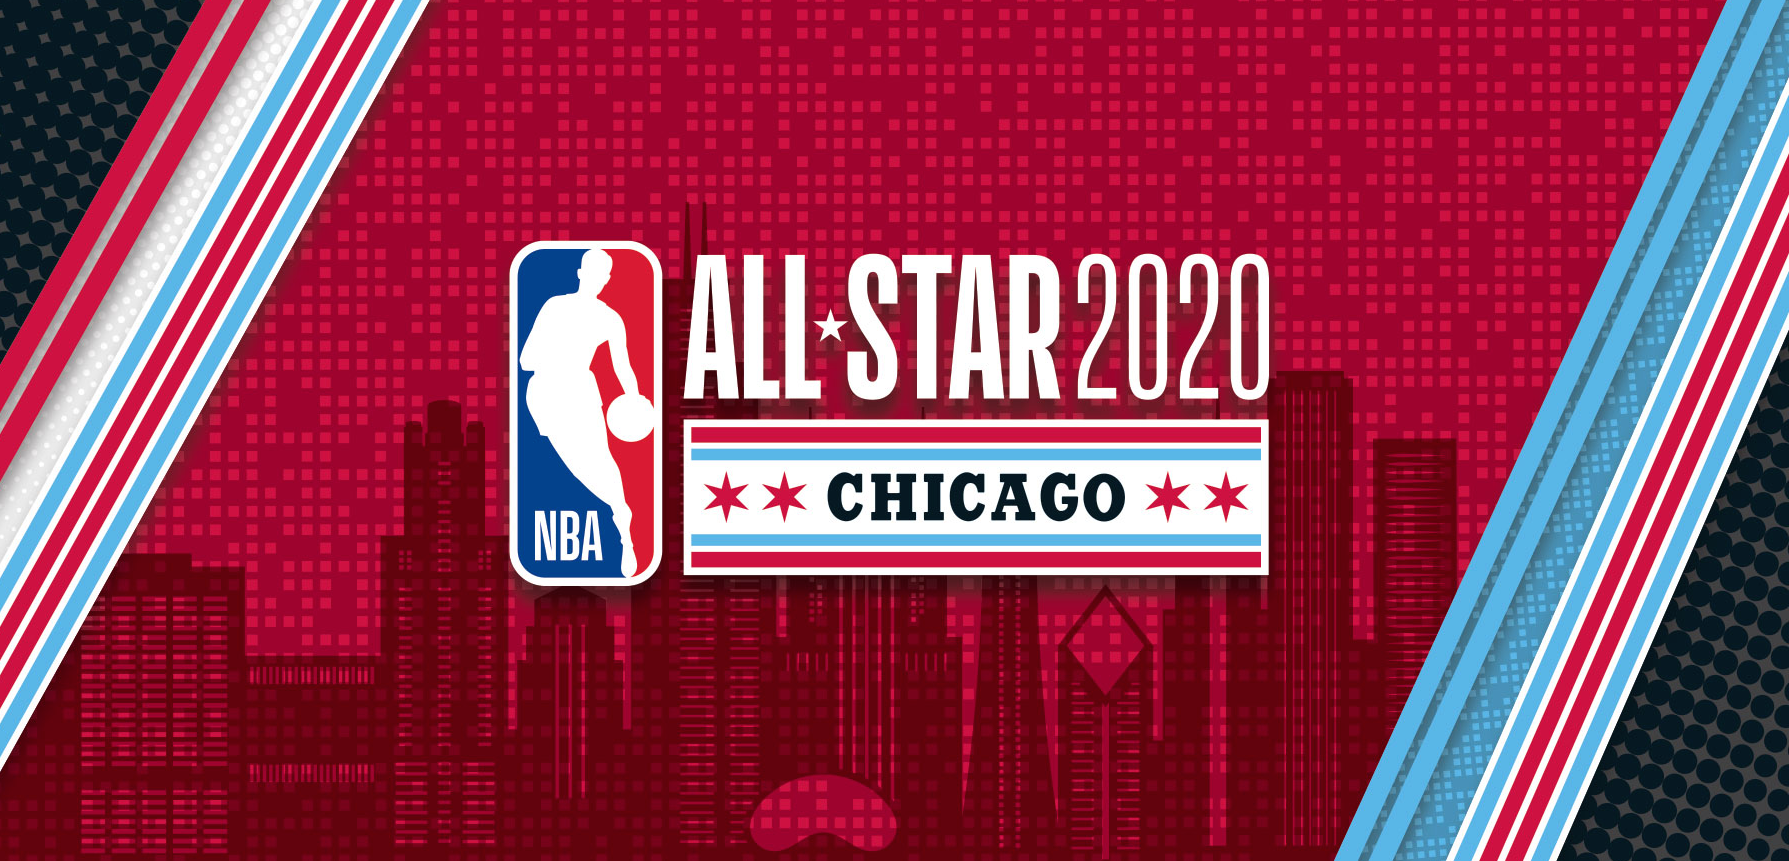 NBA All Star Game 2020: Official Chicago Guide to Weekend Events